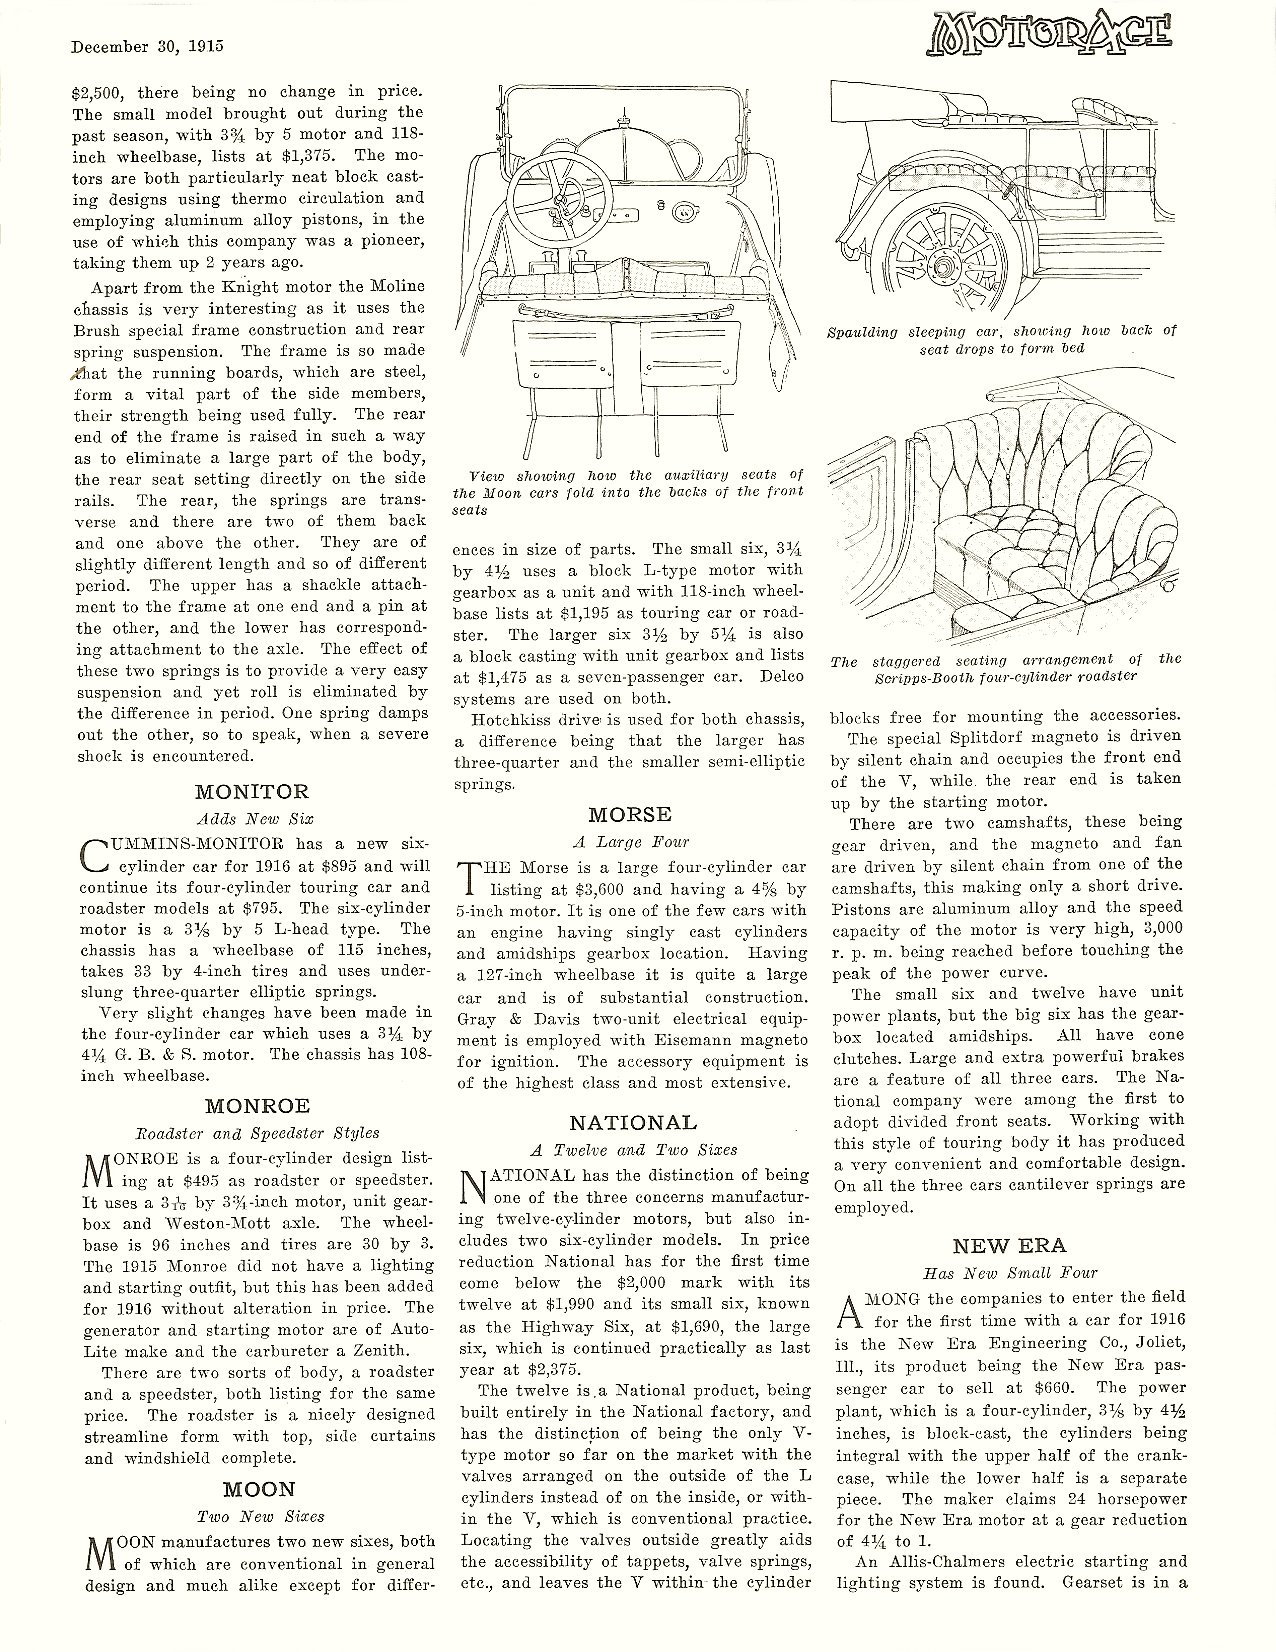 1916 Motor Cars Booklet Page 2